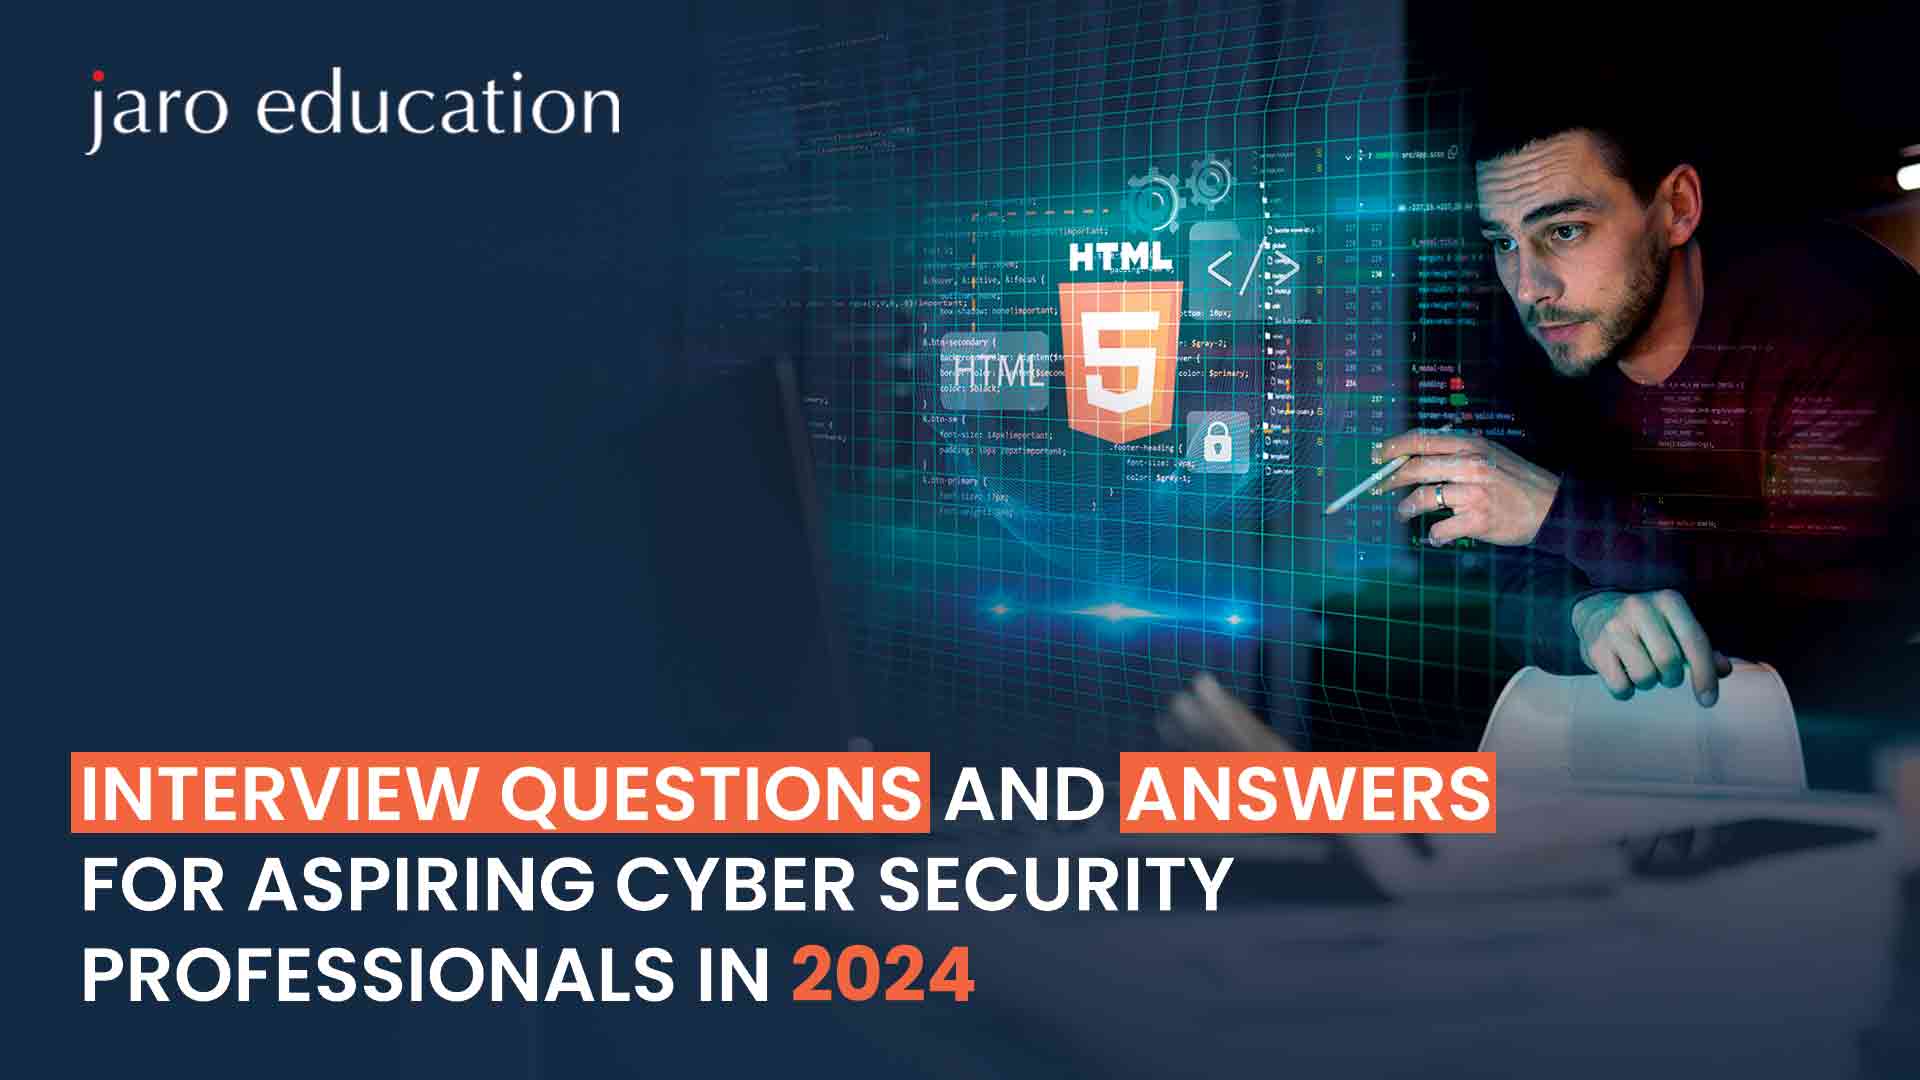 Interview Questions and Answers for Aspiring Cyber Security Professionals in 2024